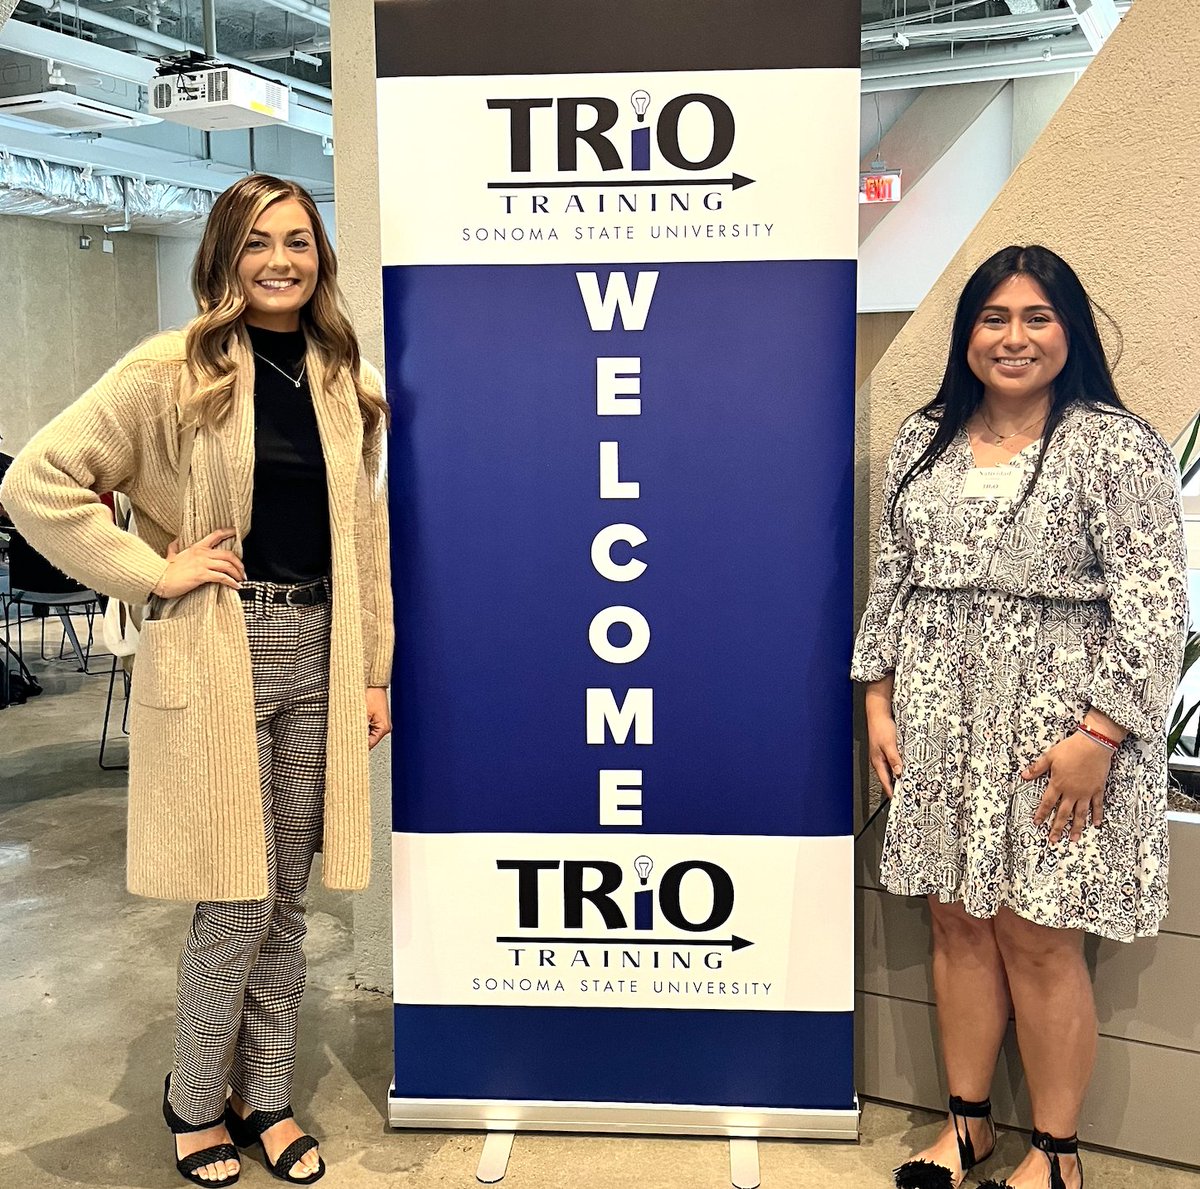 AIM's Ciara Knudsen and Naty Ledesma, are at the Priority 5 TRIO Training in New Haven, Connecticut! 🌟 Representing the AIM Youth Academies, they're gearing up to dive deep into diverse skillsets and emerge as unstoppable forces of change! 💥 #AIMEmpowers #AIM